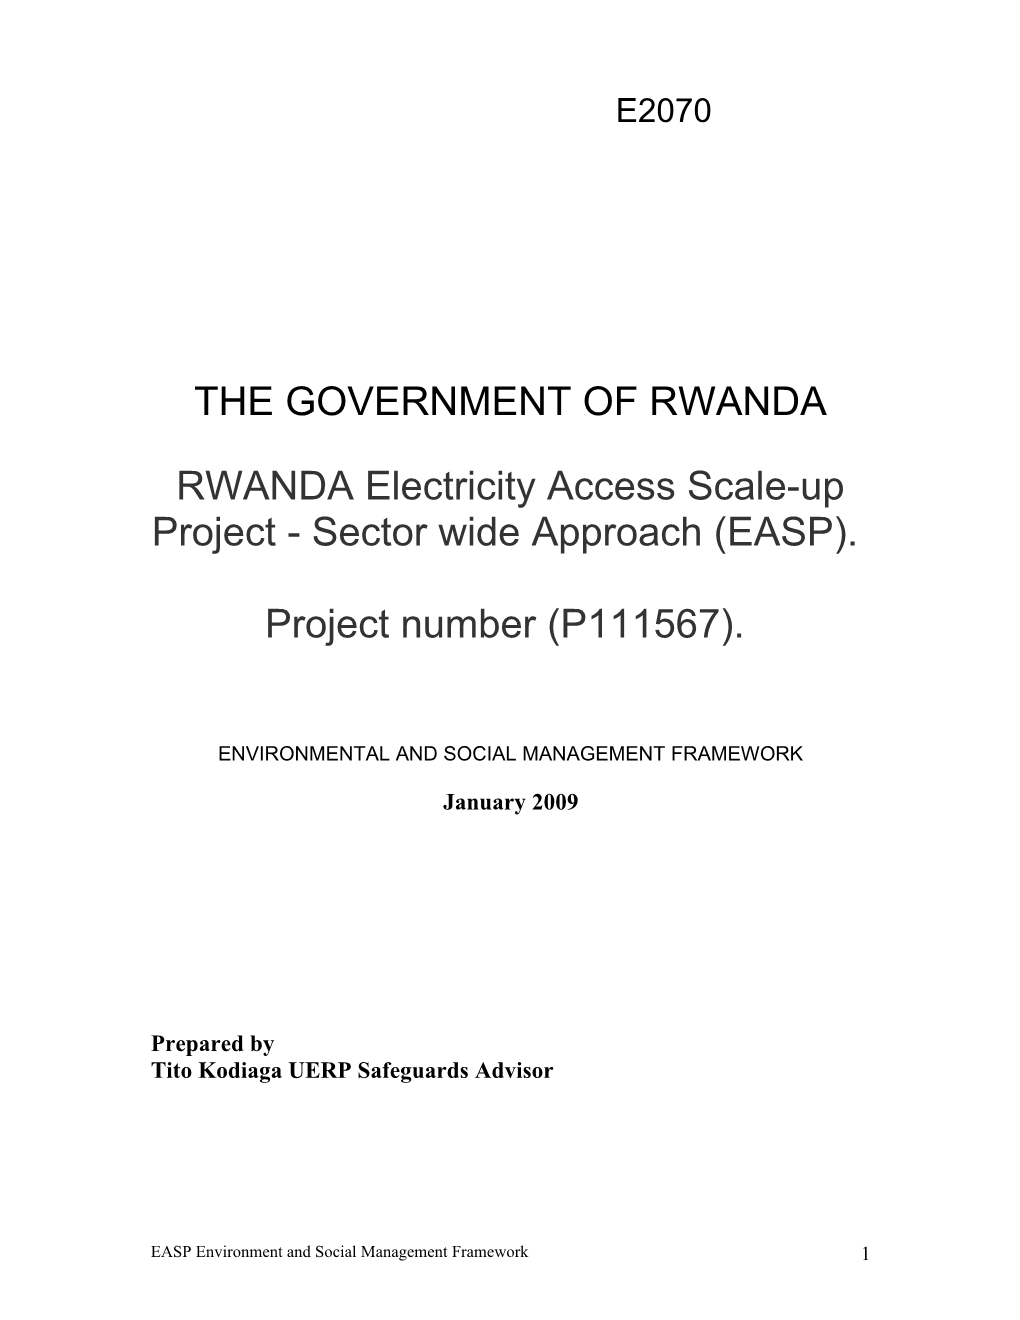 RWANDA Electricity Access Scale-Up Project -Sector Wide Approach (EASP)